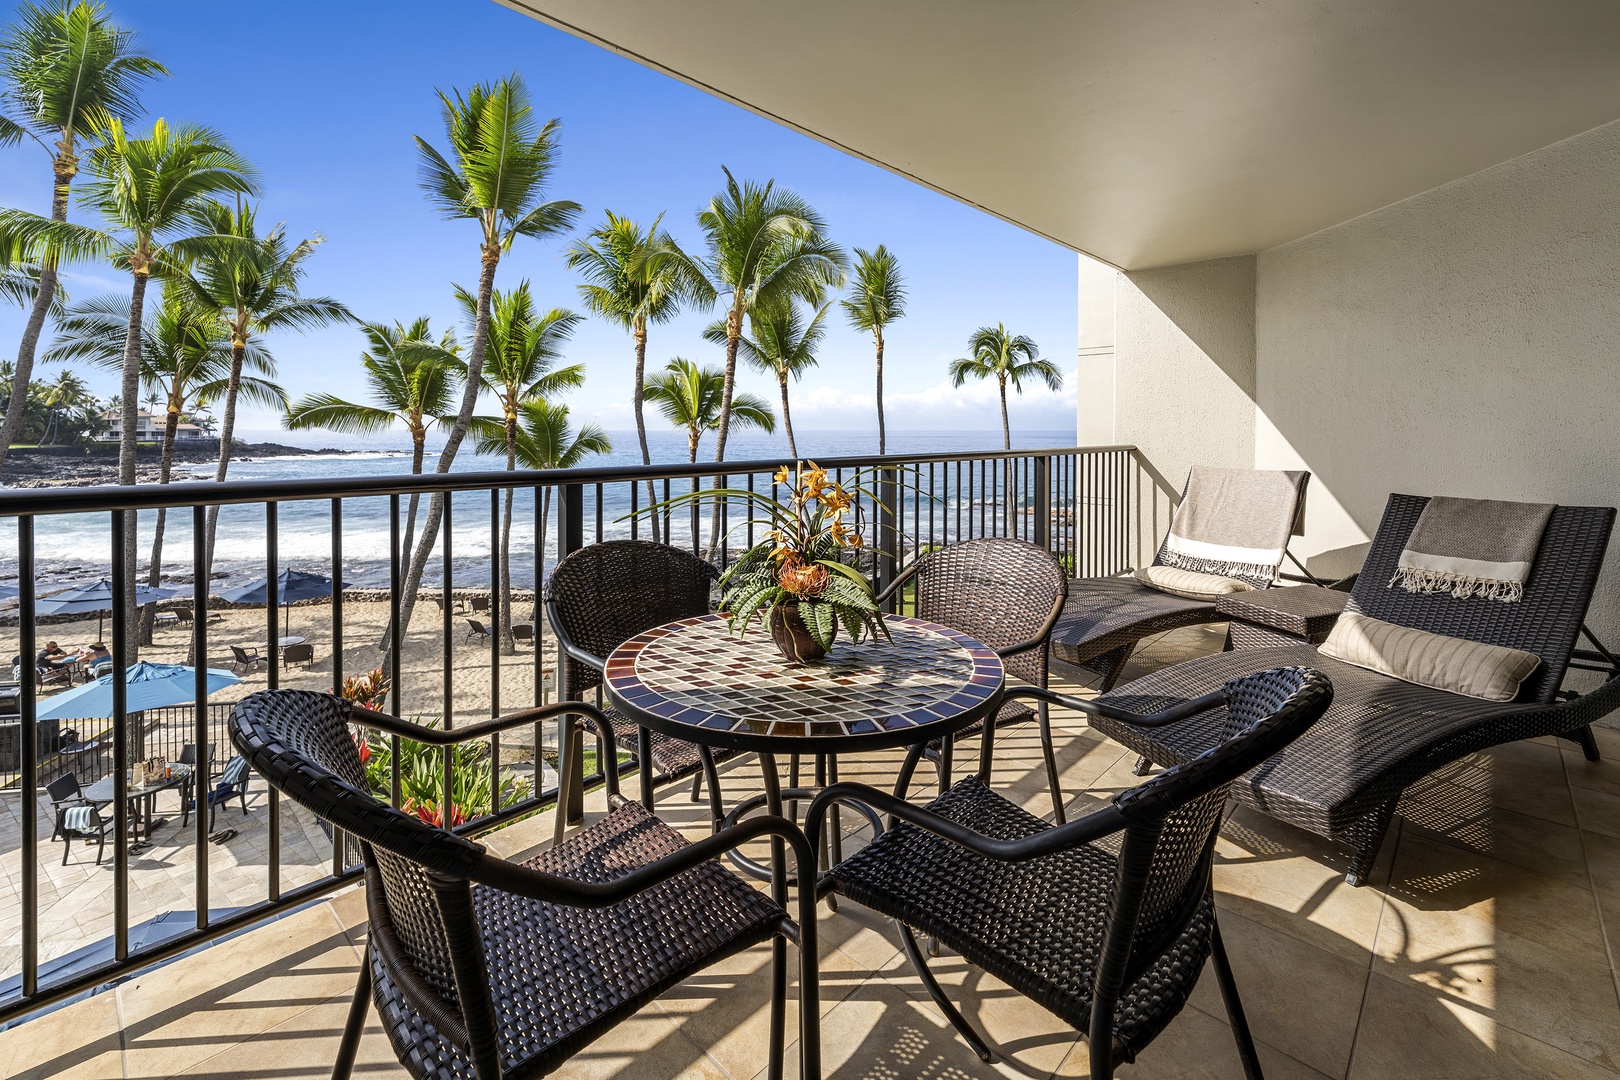 Lawn Chairs on the lanai with amazing panoramic ocean views